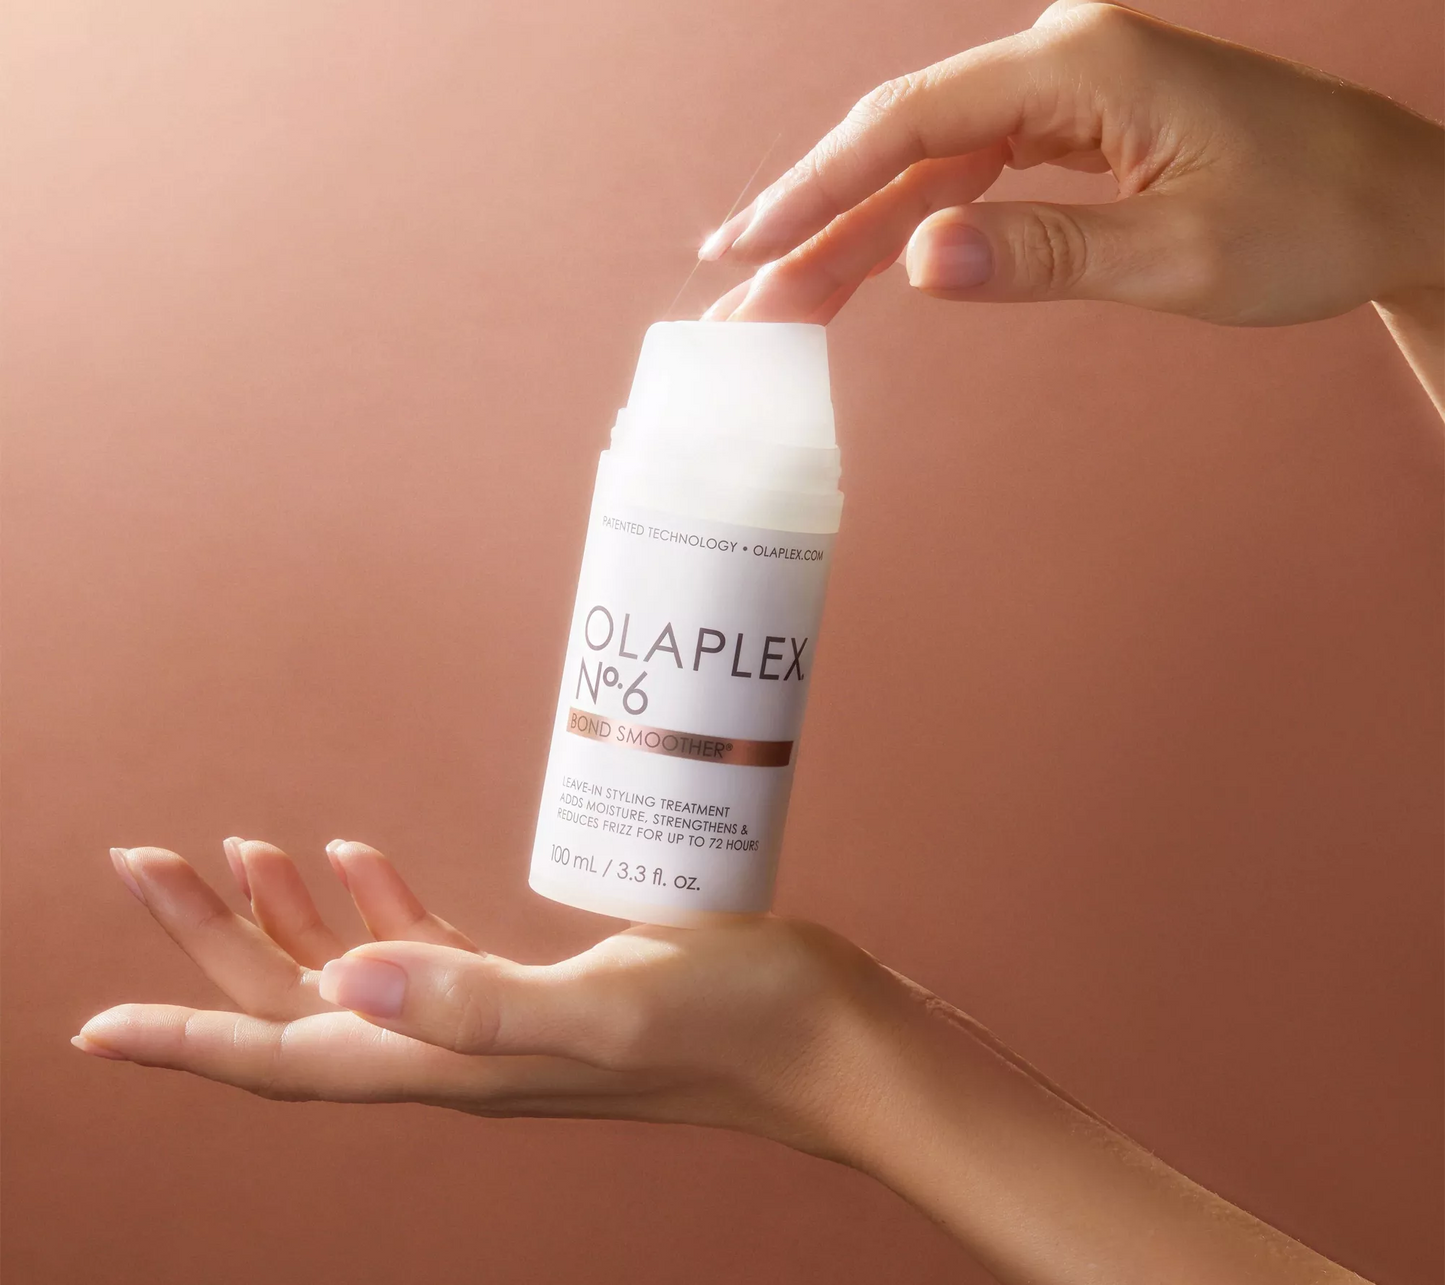 Olaplex No.6 Bond Smoother Leave-In Styling Creme